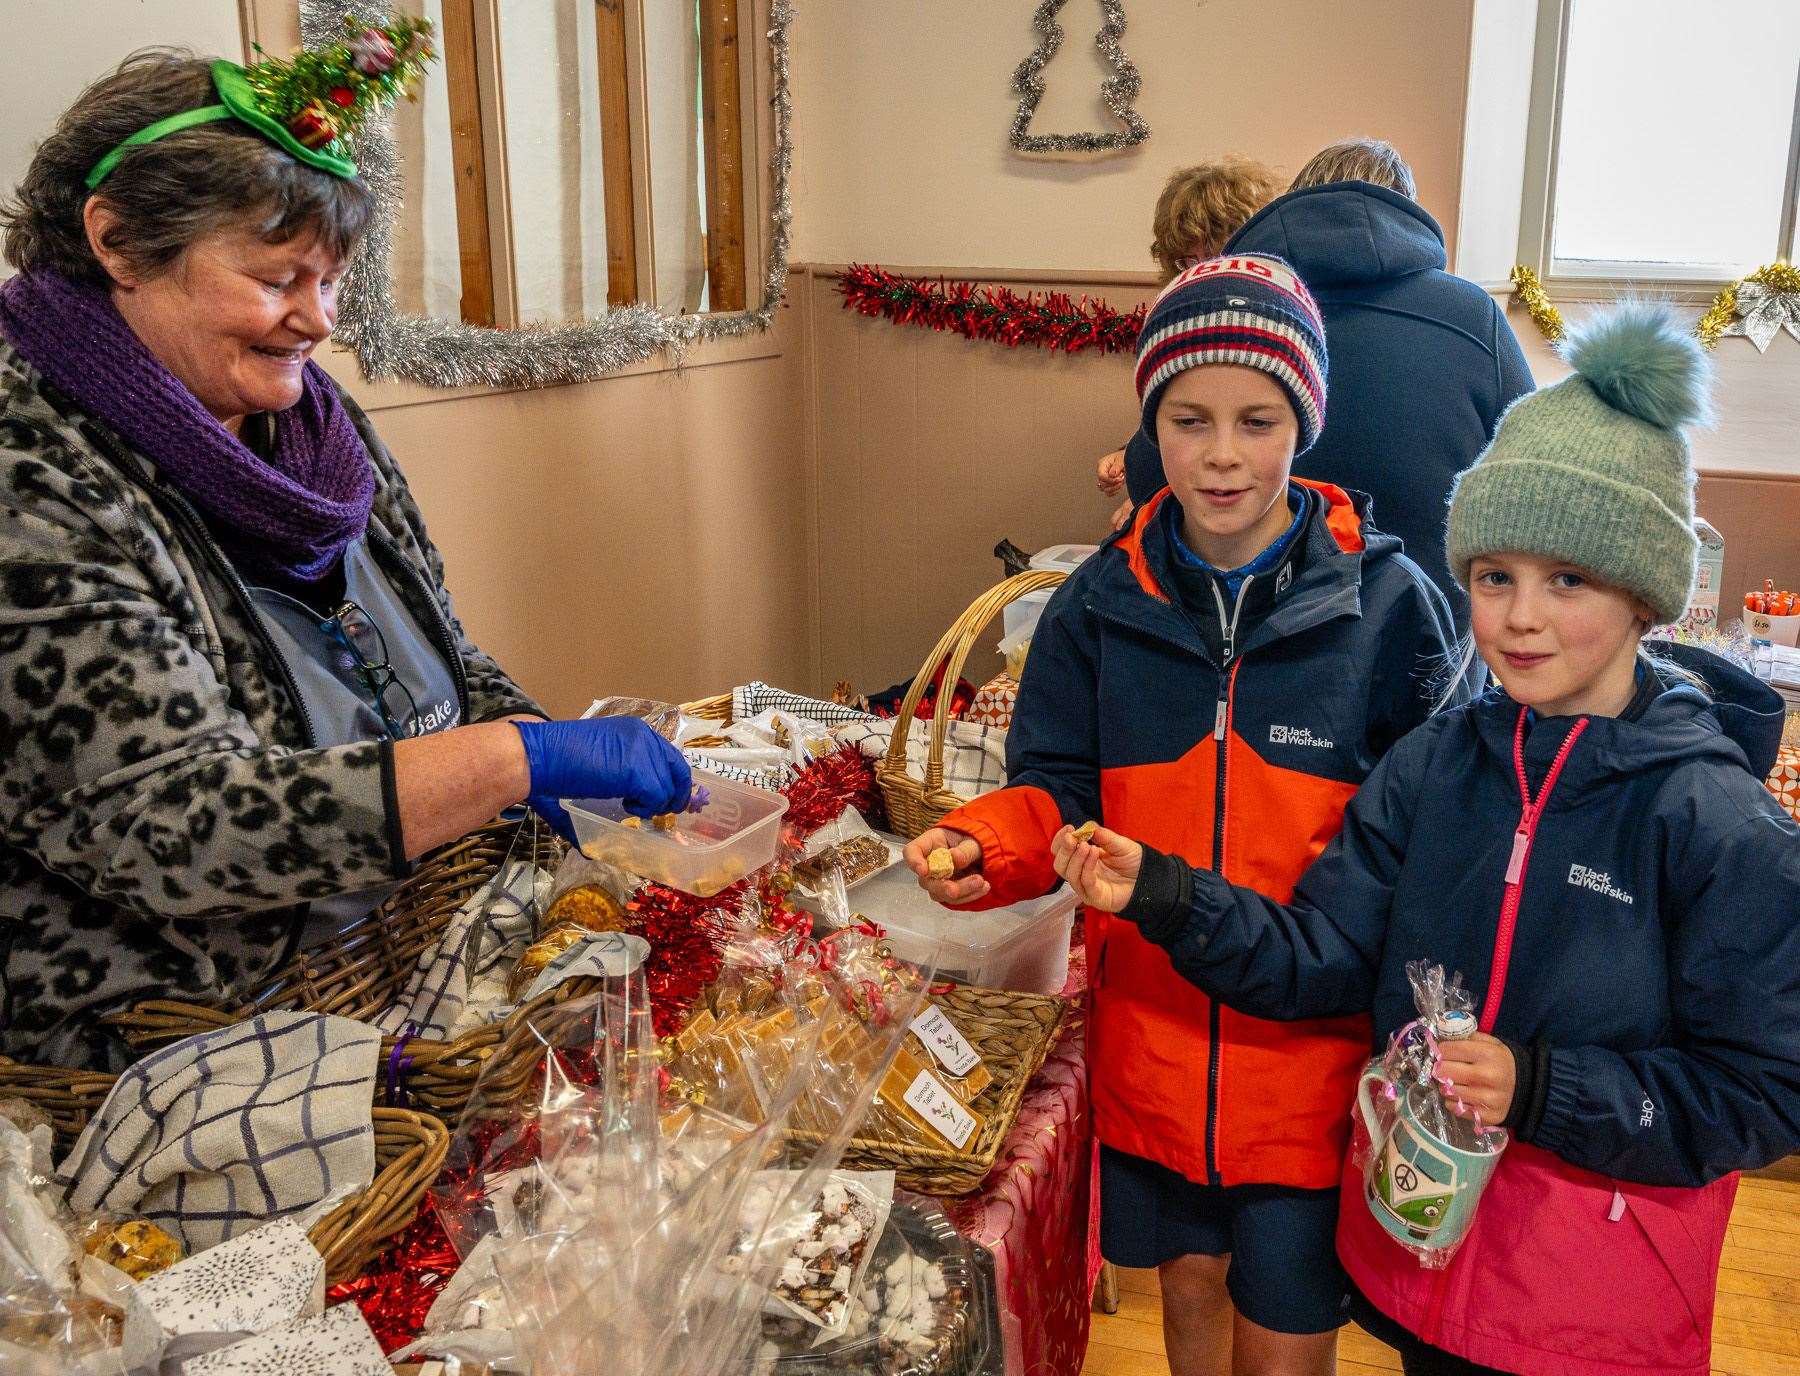 Euan and Morven Cameron sample some Dornoch Tablet from Mhairi Mackay's Dornoch-based Thistle Bake. Picture: Andy Kirby